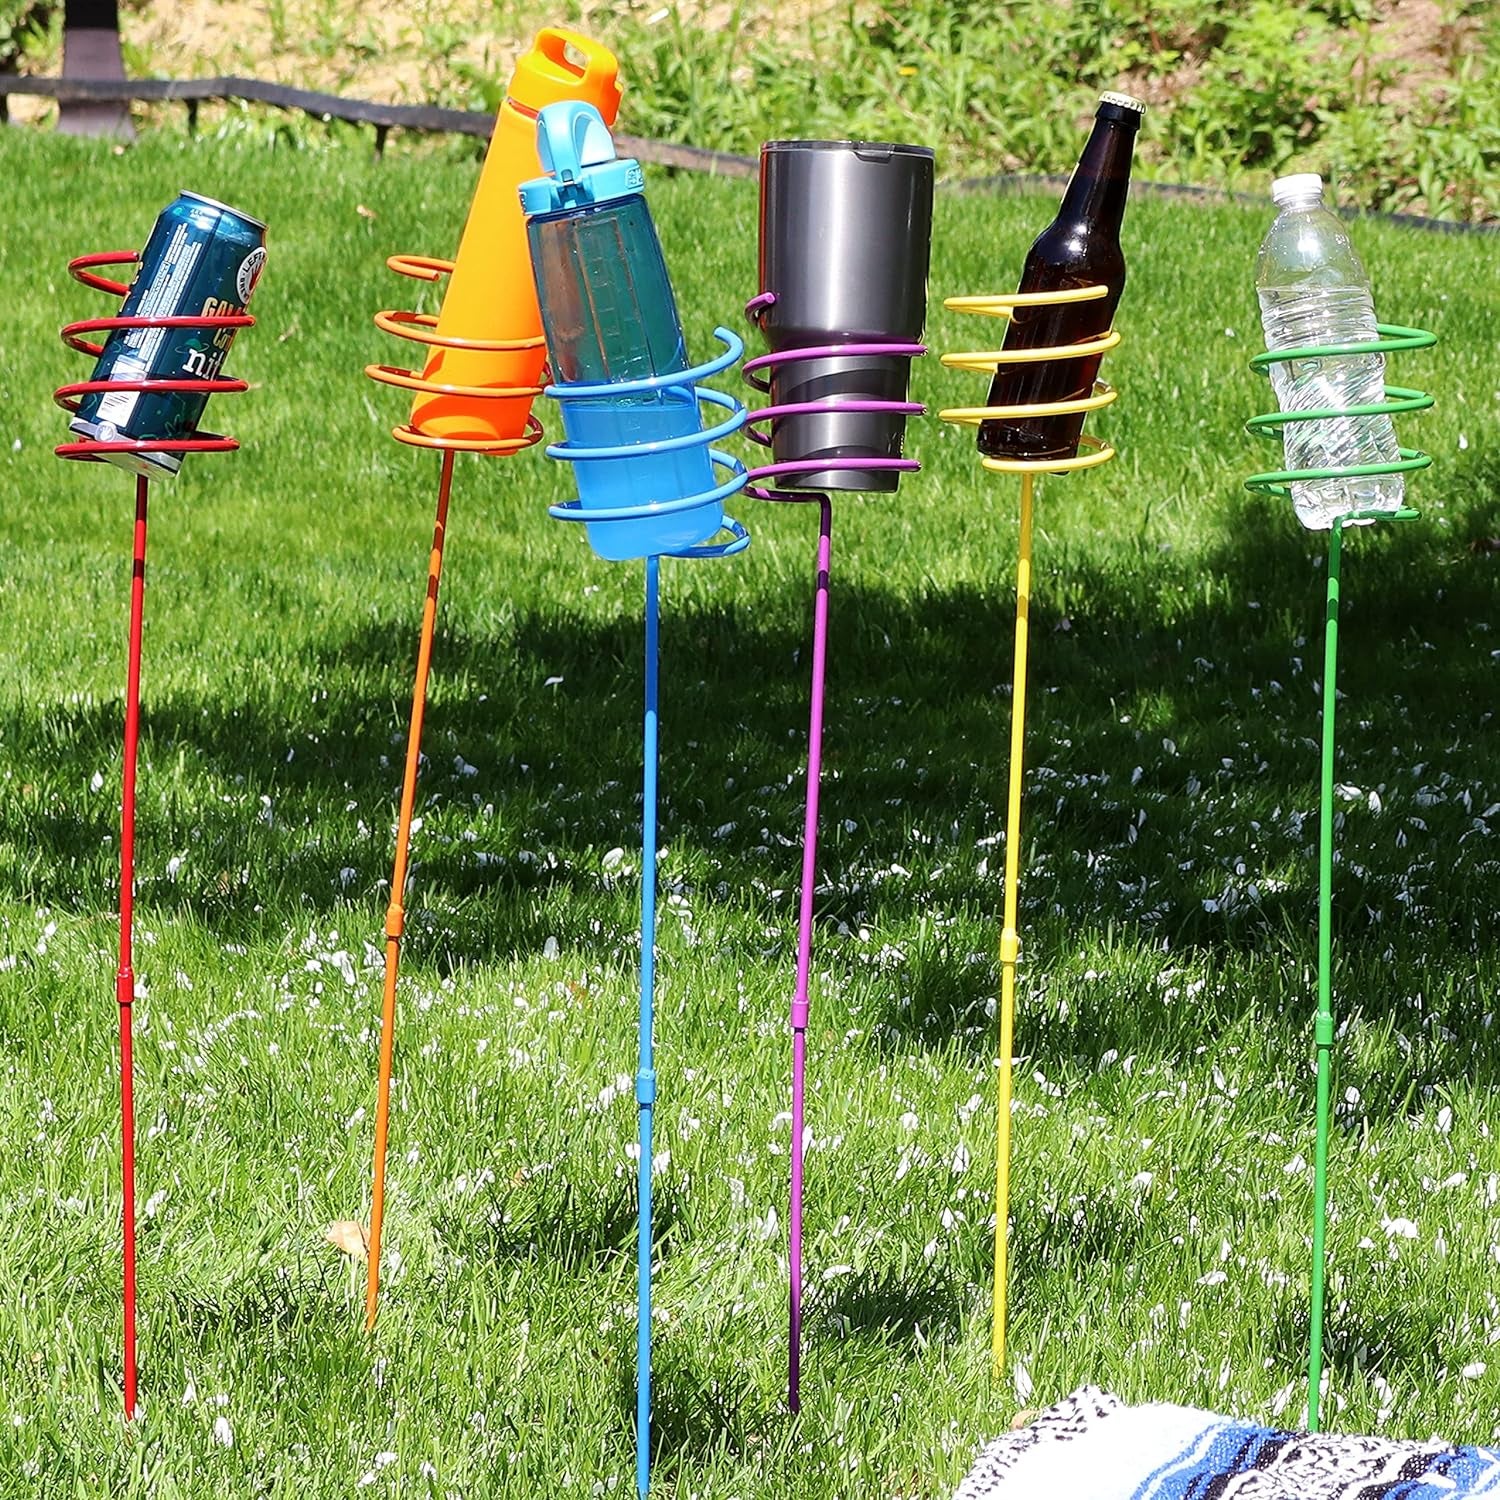 Five garden stakes with spiral holders containing different types of drinkware in a grassy yard